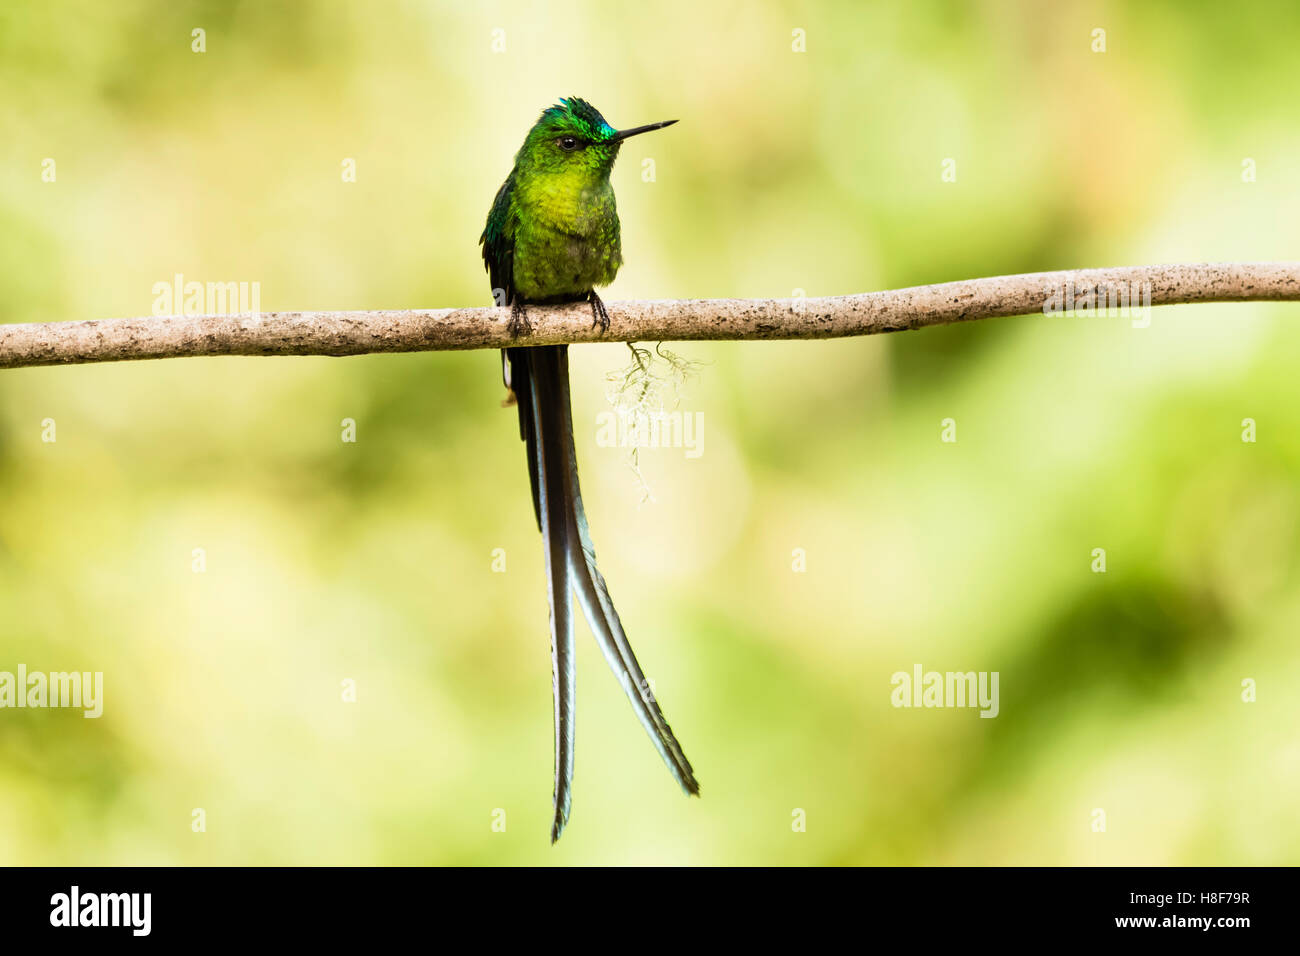 Green-Tailed Trainbearer (Lesbia nuna), Acaime Private Reserve, Valle de Cocora, Zona Cafetera, Colombia Stock Photo